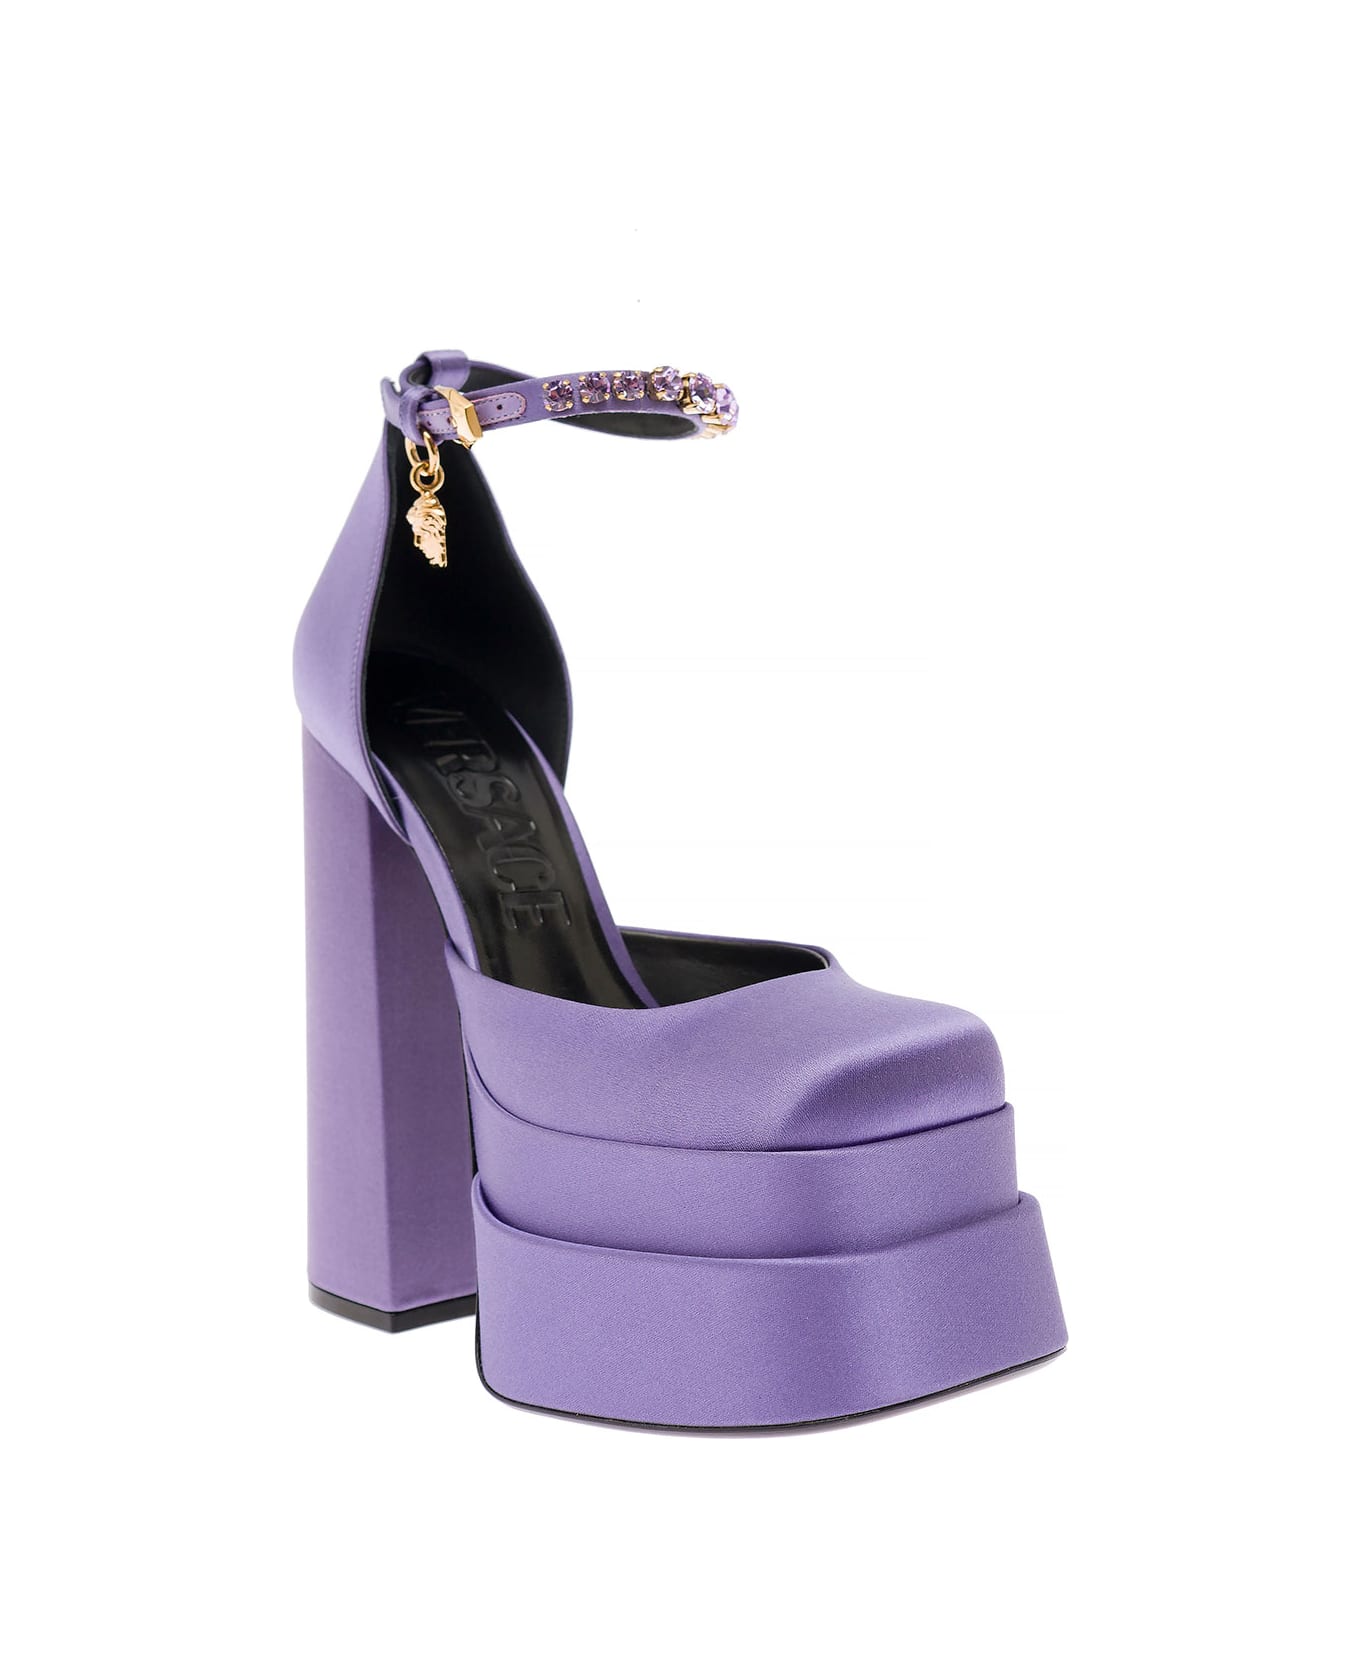 Versace Mary Jane Lilac Satin Pumps With Medusa Charm Versace Woman - Violet